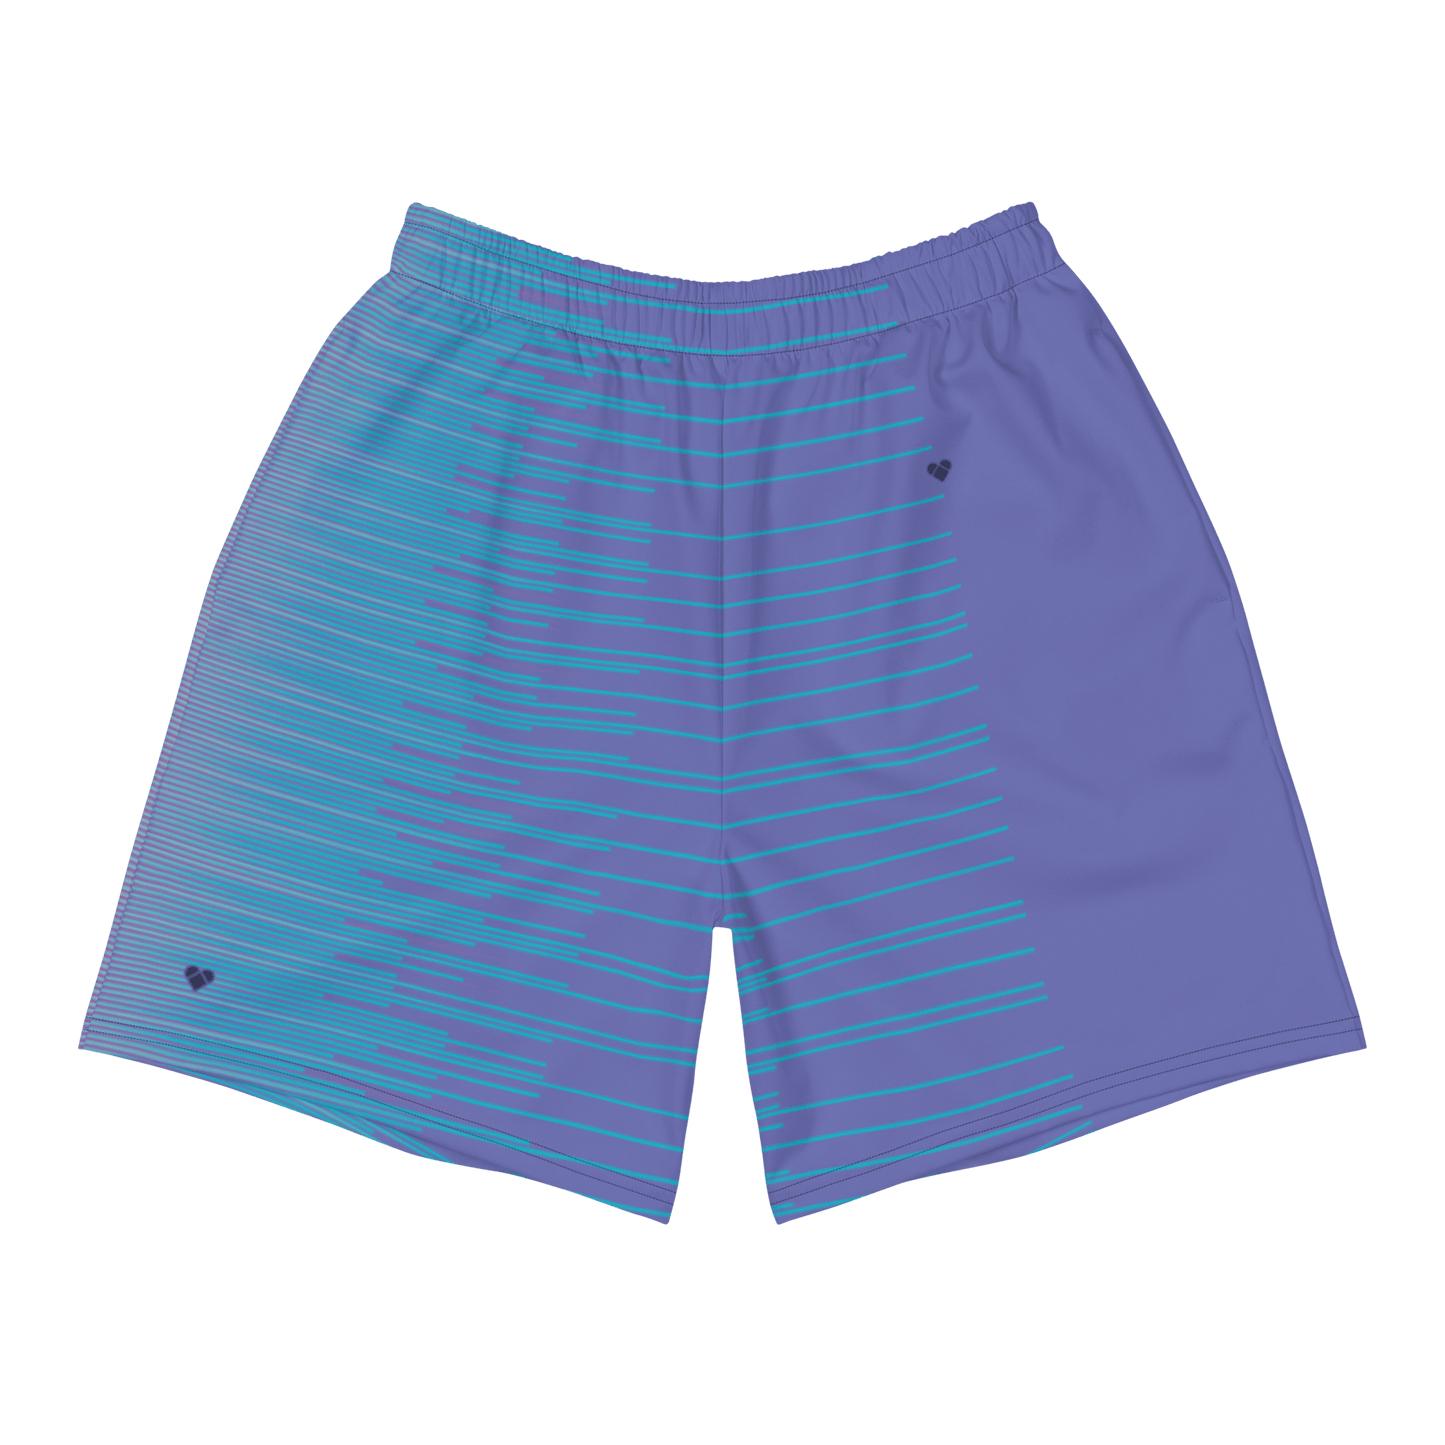 Periwinkle Stripes Dual Sport Shorts for Men from CRiZ AMOR's Amor Dual Collection